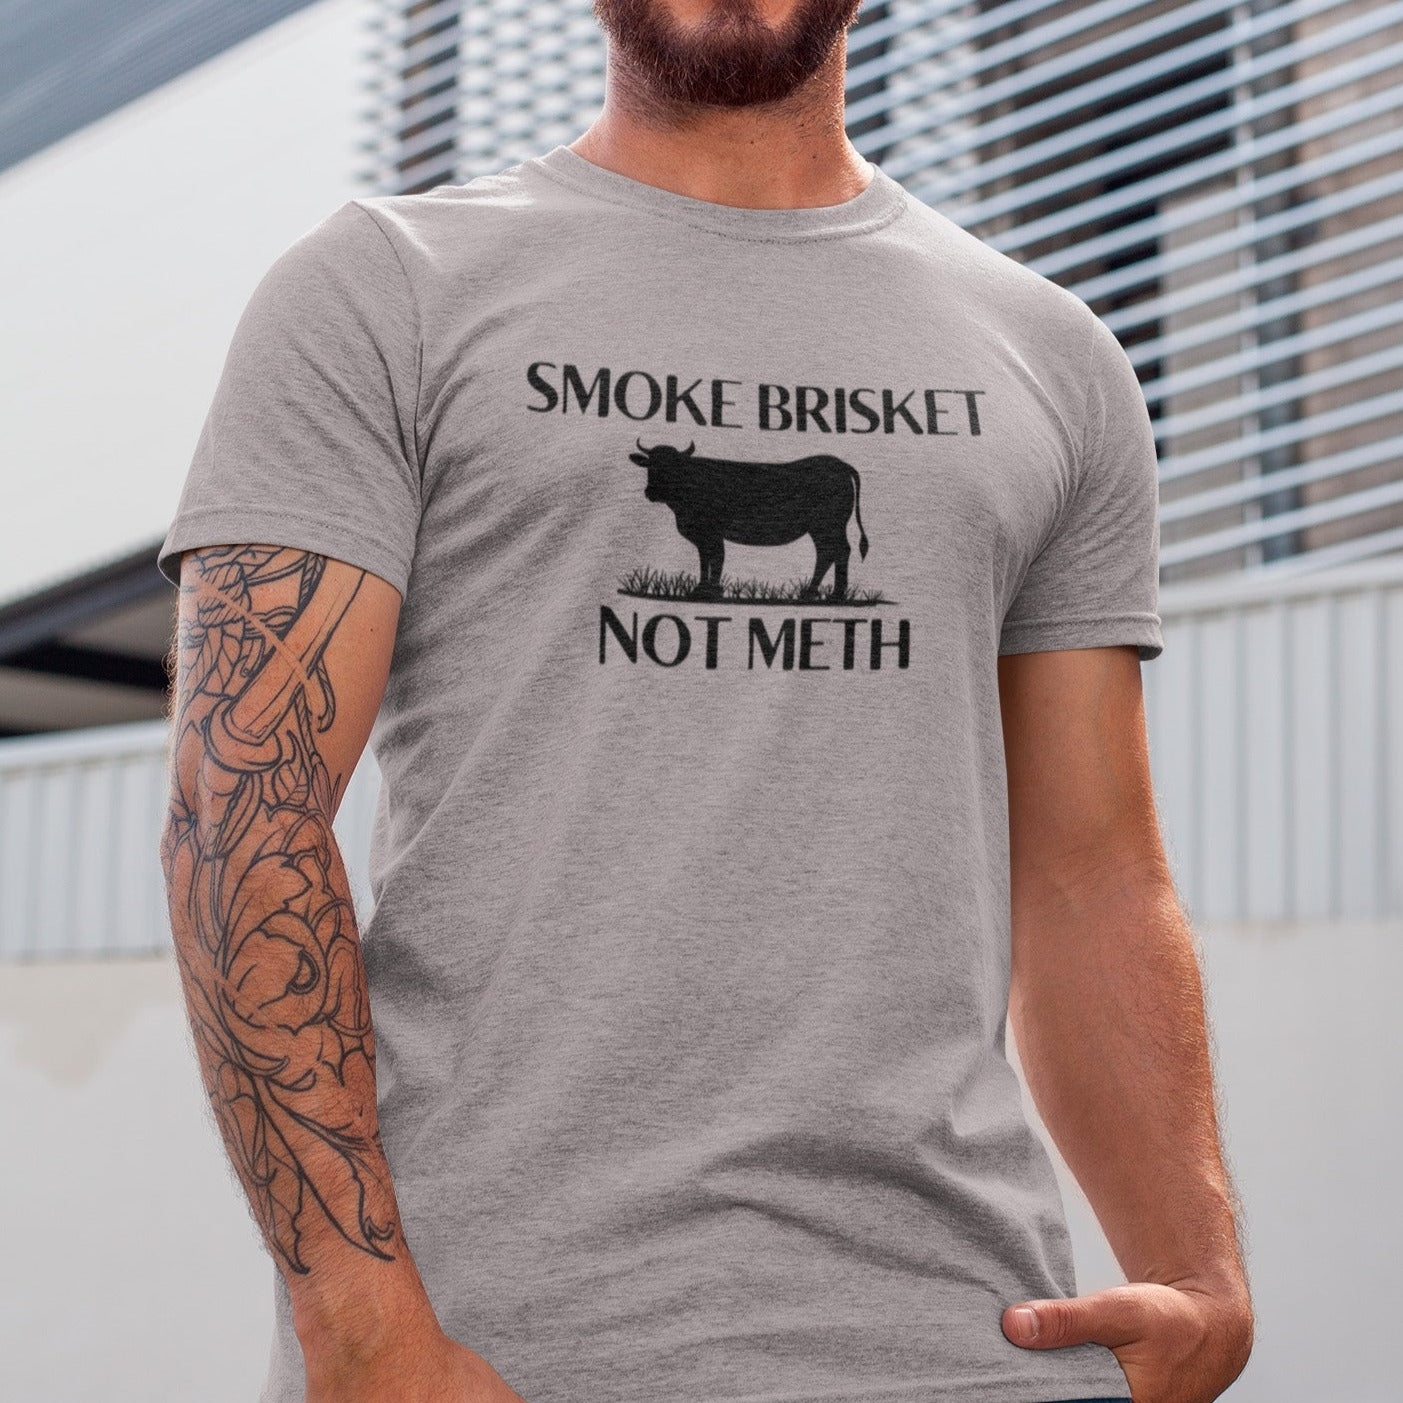 smoke-brisket-not-meth-athletic-heather-grey-t-shirt-funny-cow-tee-mockup-of-a-tattooed-man-smiling